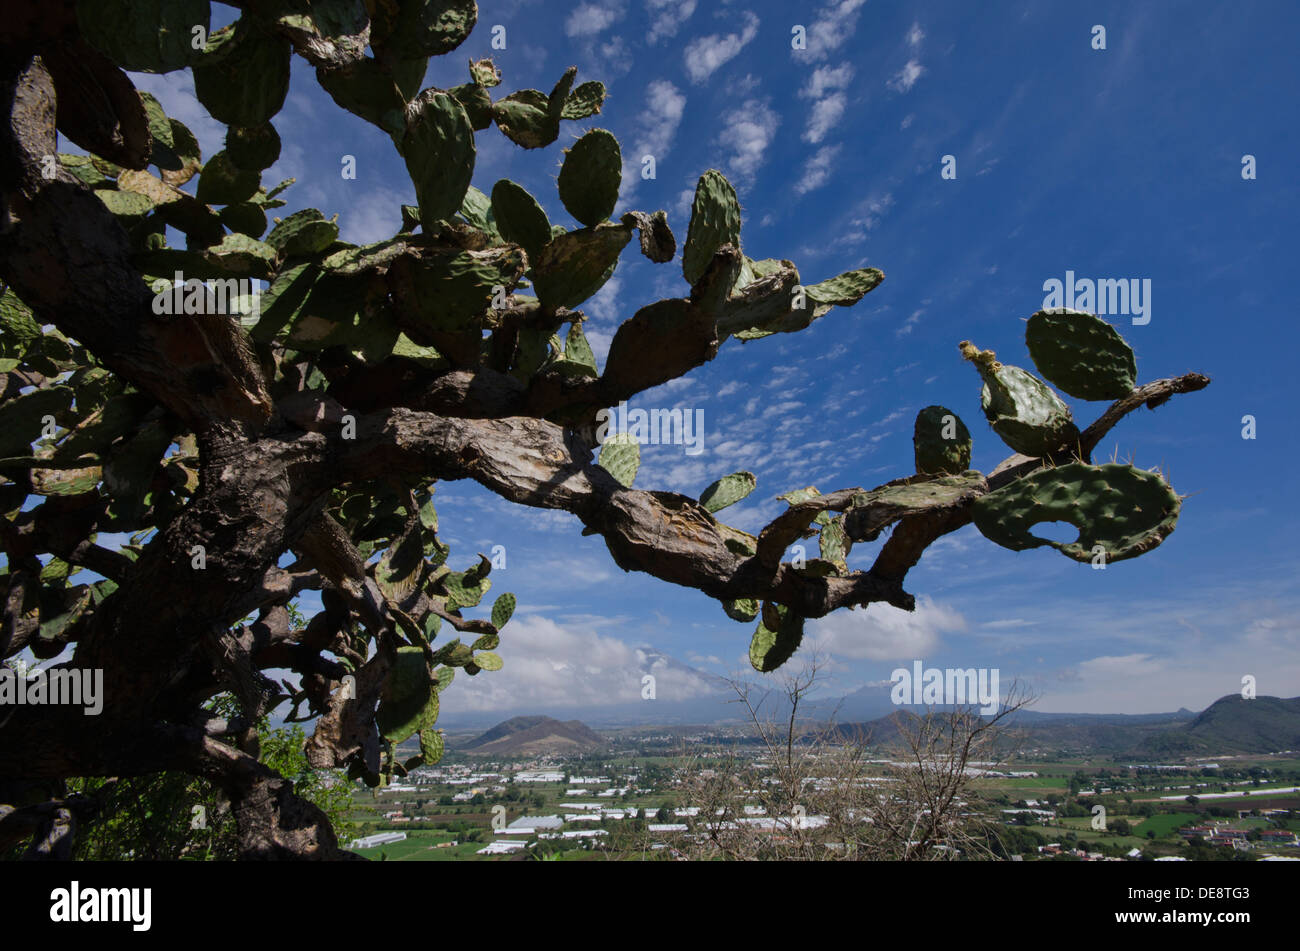 View from the top of the hill in Atlixco towards Popocatepetl in Mexico, showing Nopal plant in foreground. Stock Photo